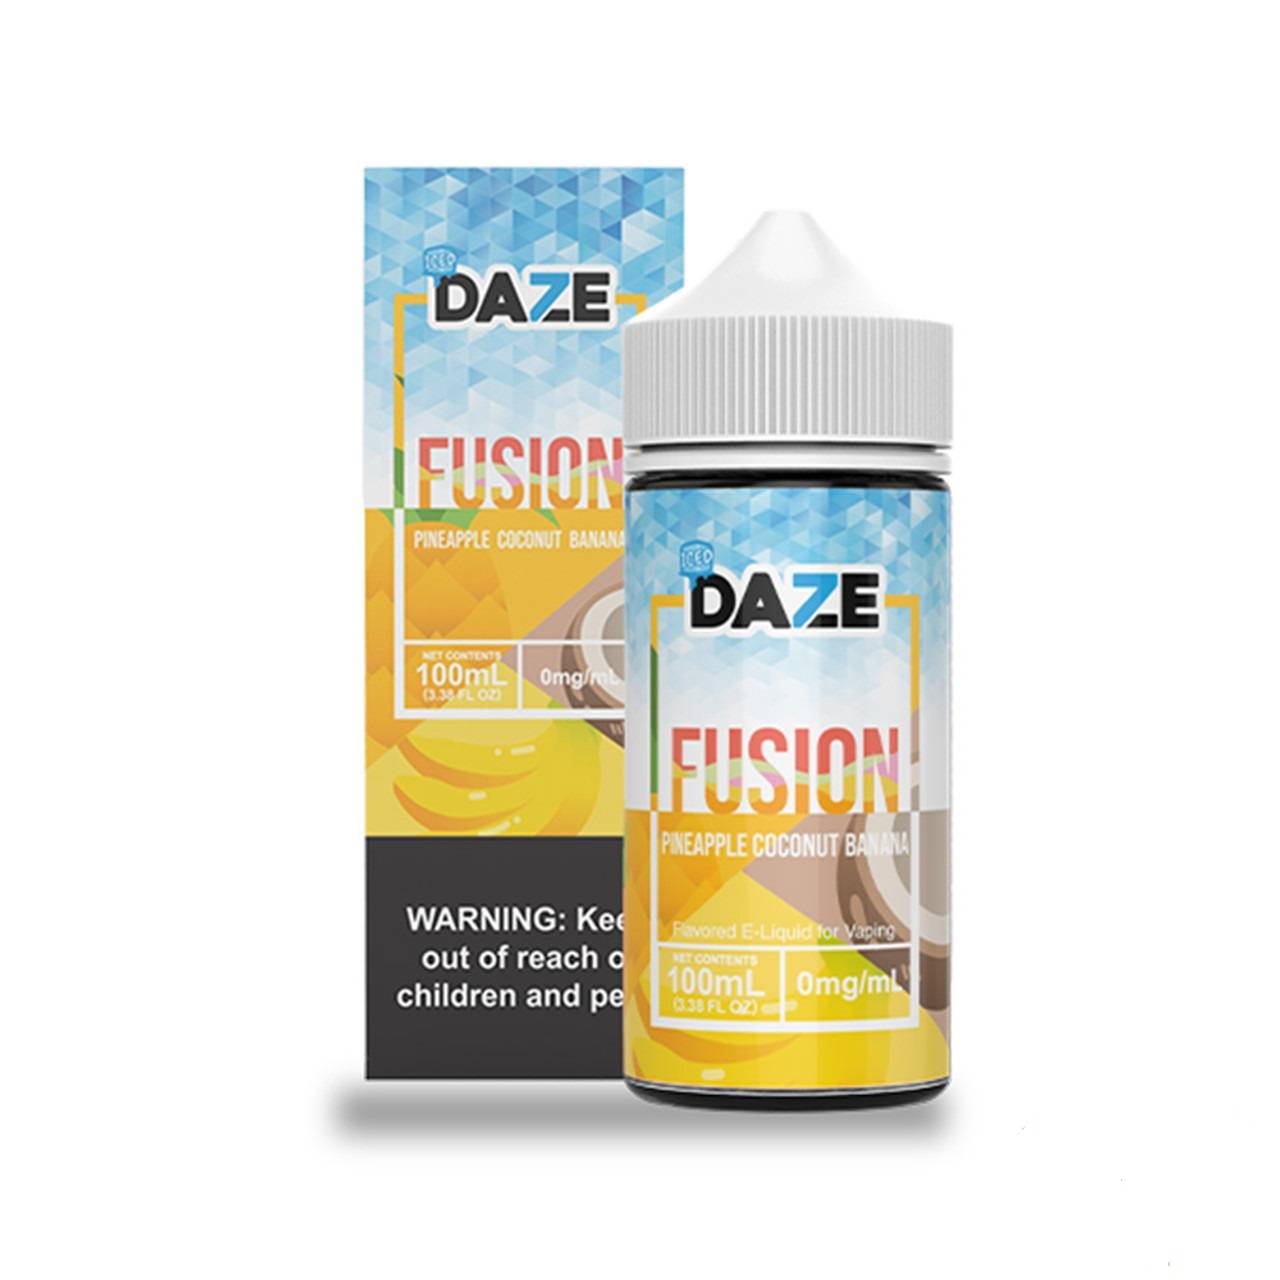 Iced Pineapple Coconut Banana 7 Daze Fusion 100 ml At Best Price In Pakistan